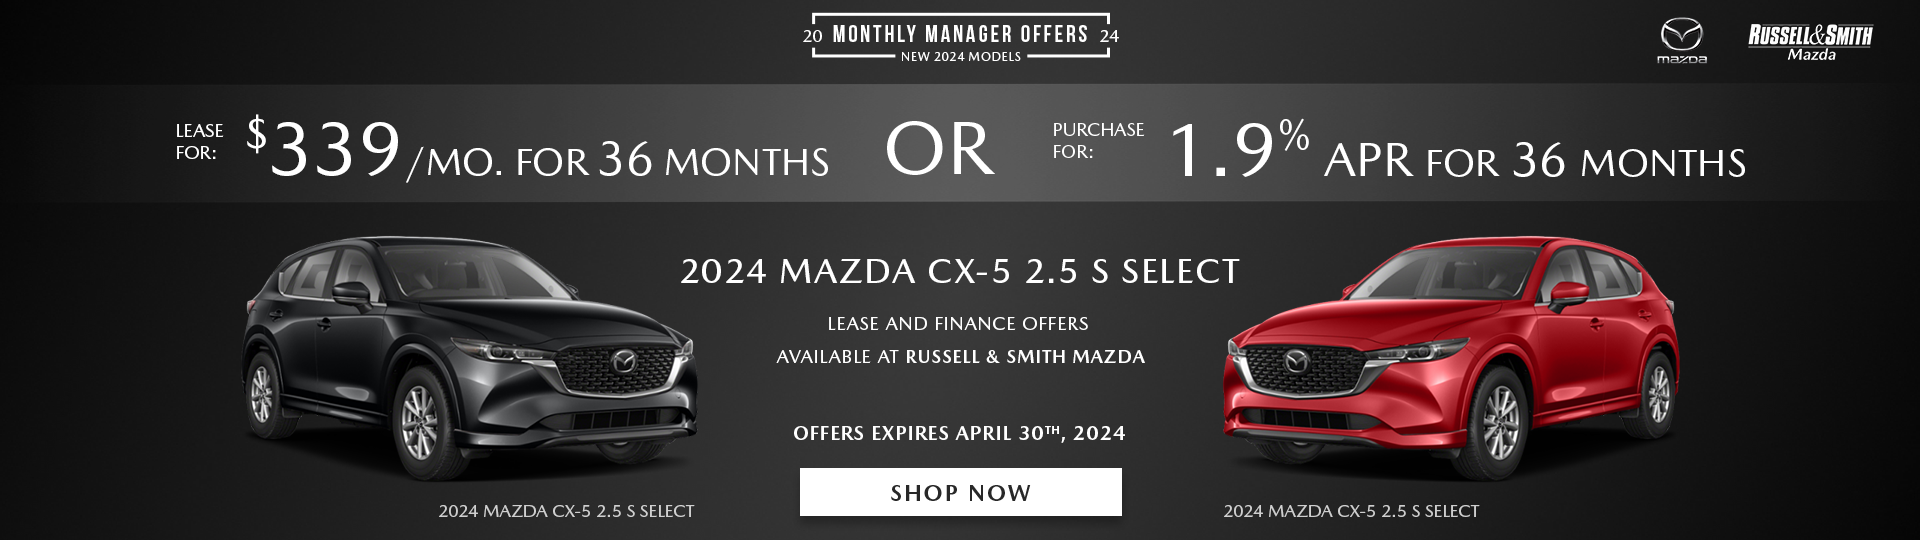 2024 Mazda CX-5 lease deals and finance specials